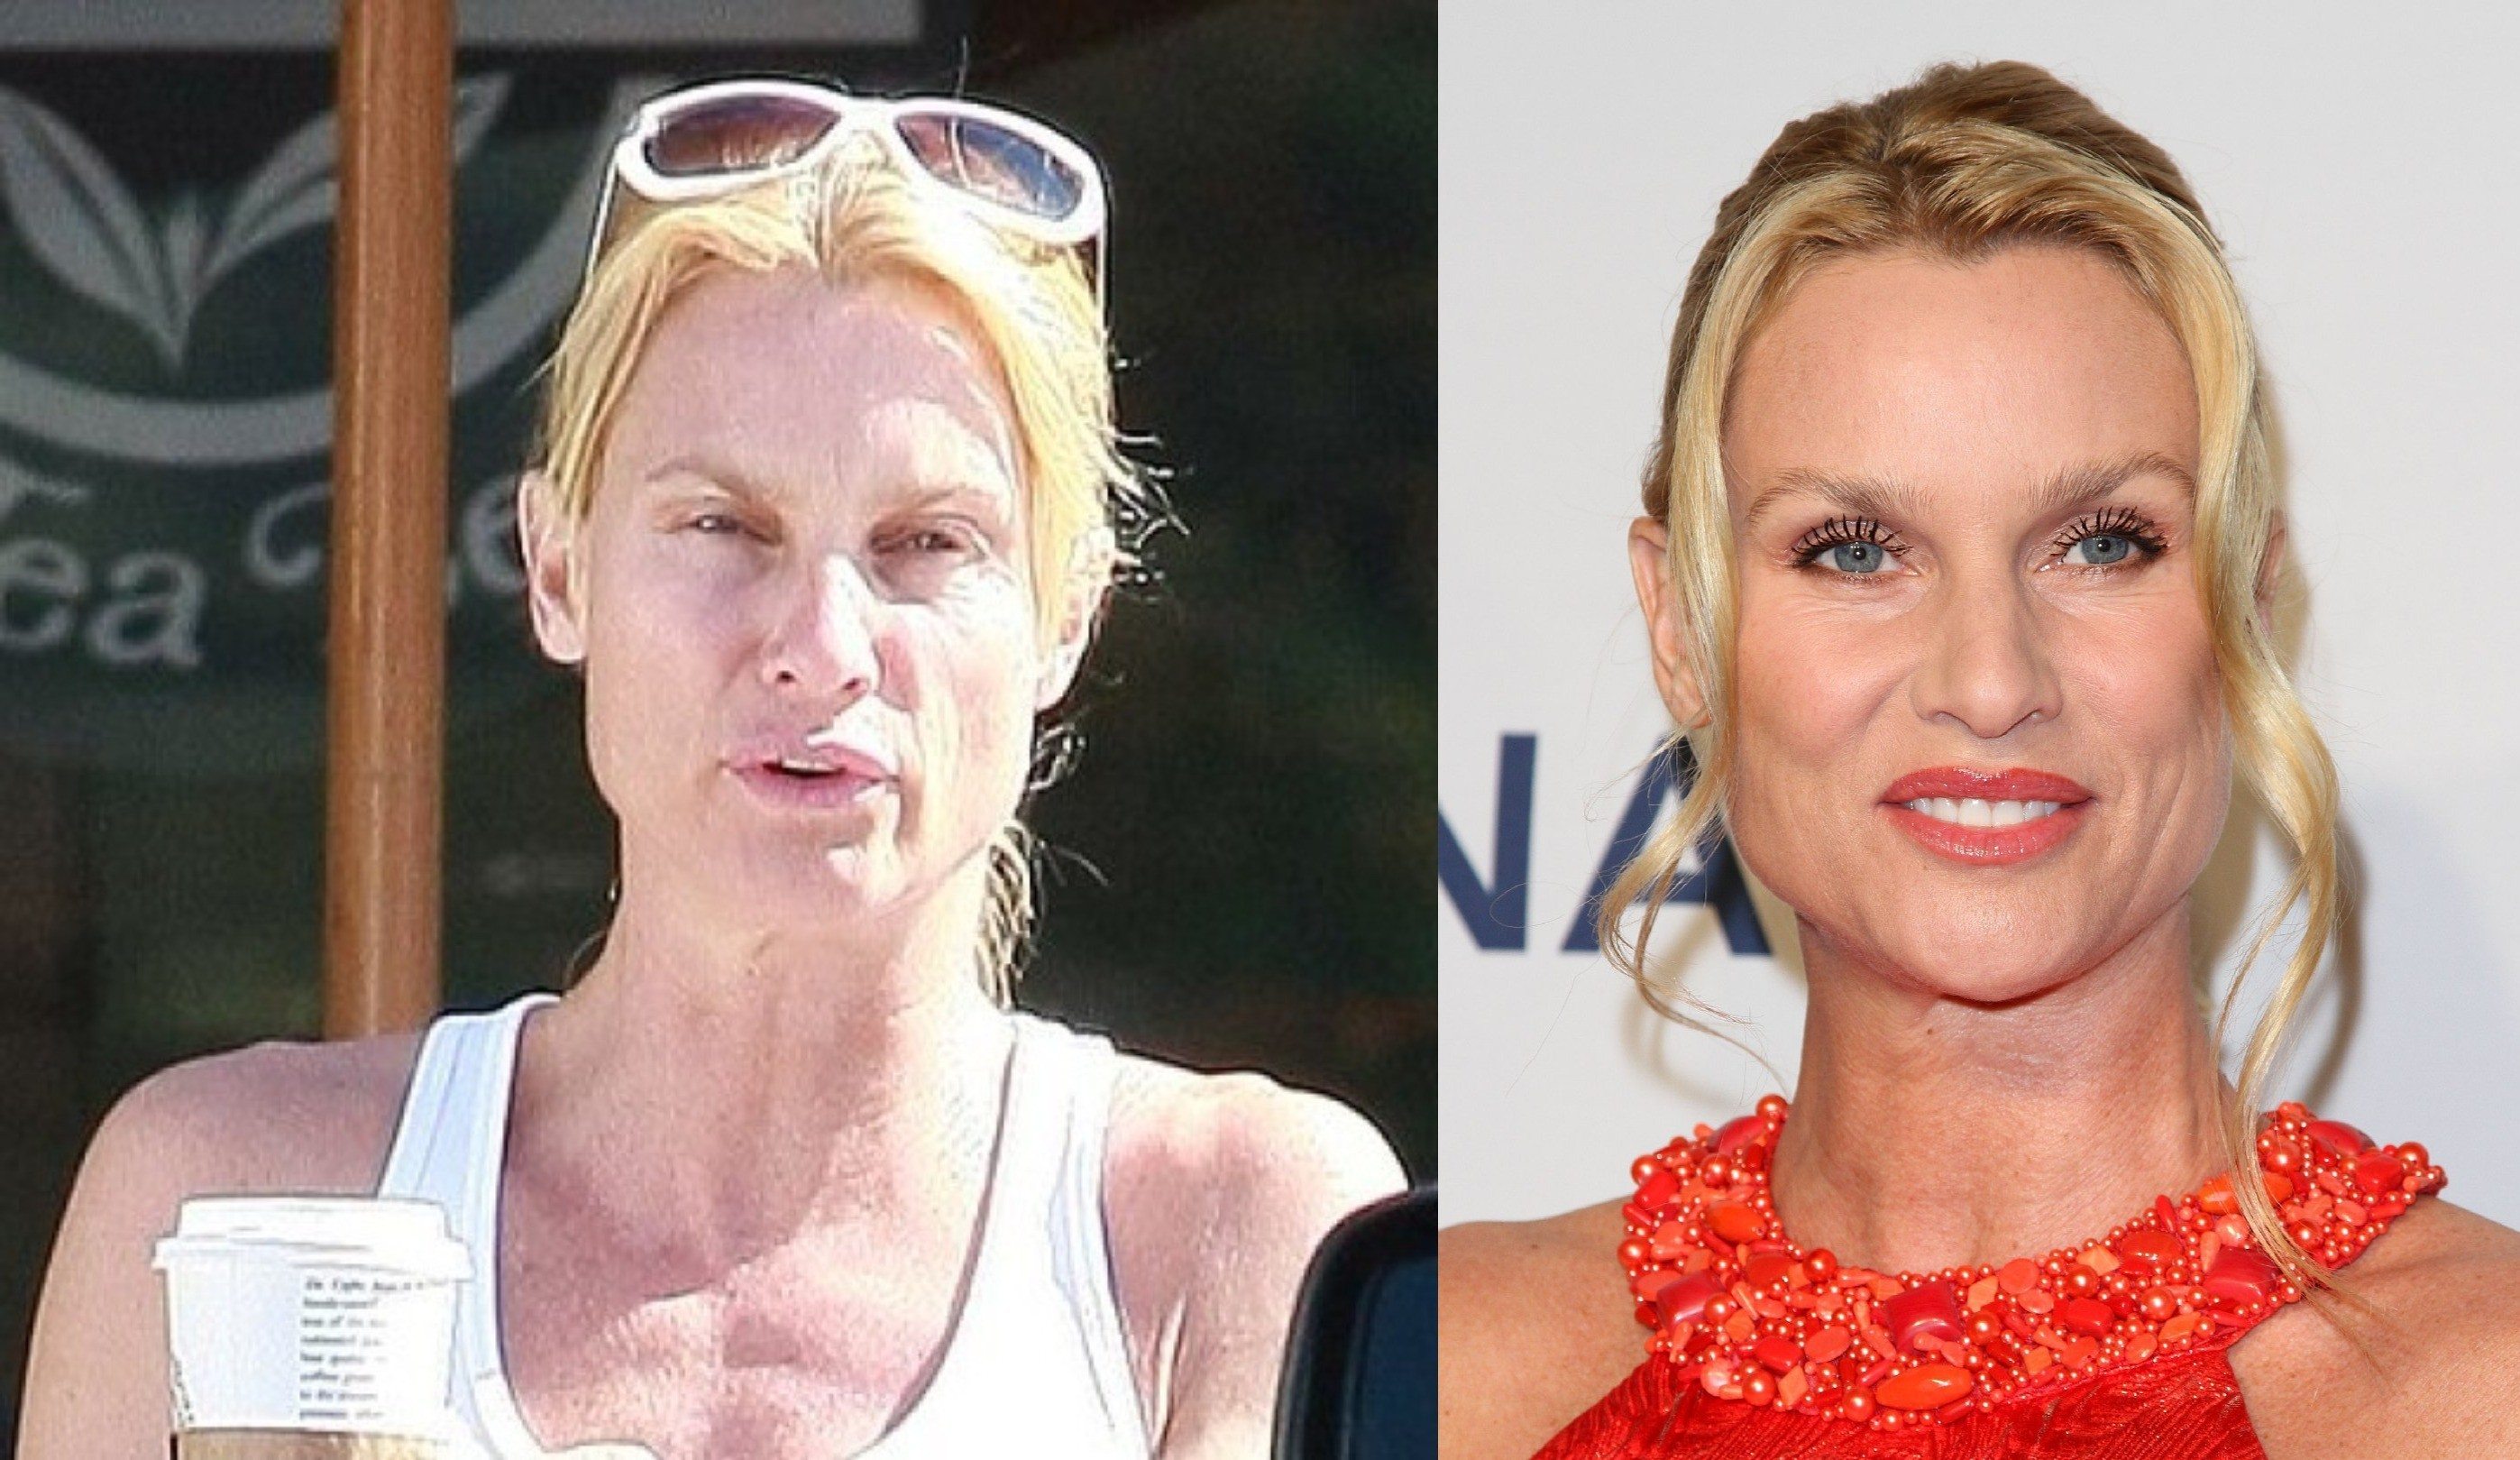 Check Out These 20 Embarrassing Photos of Celebrities Without Makeup2795 x 1619